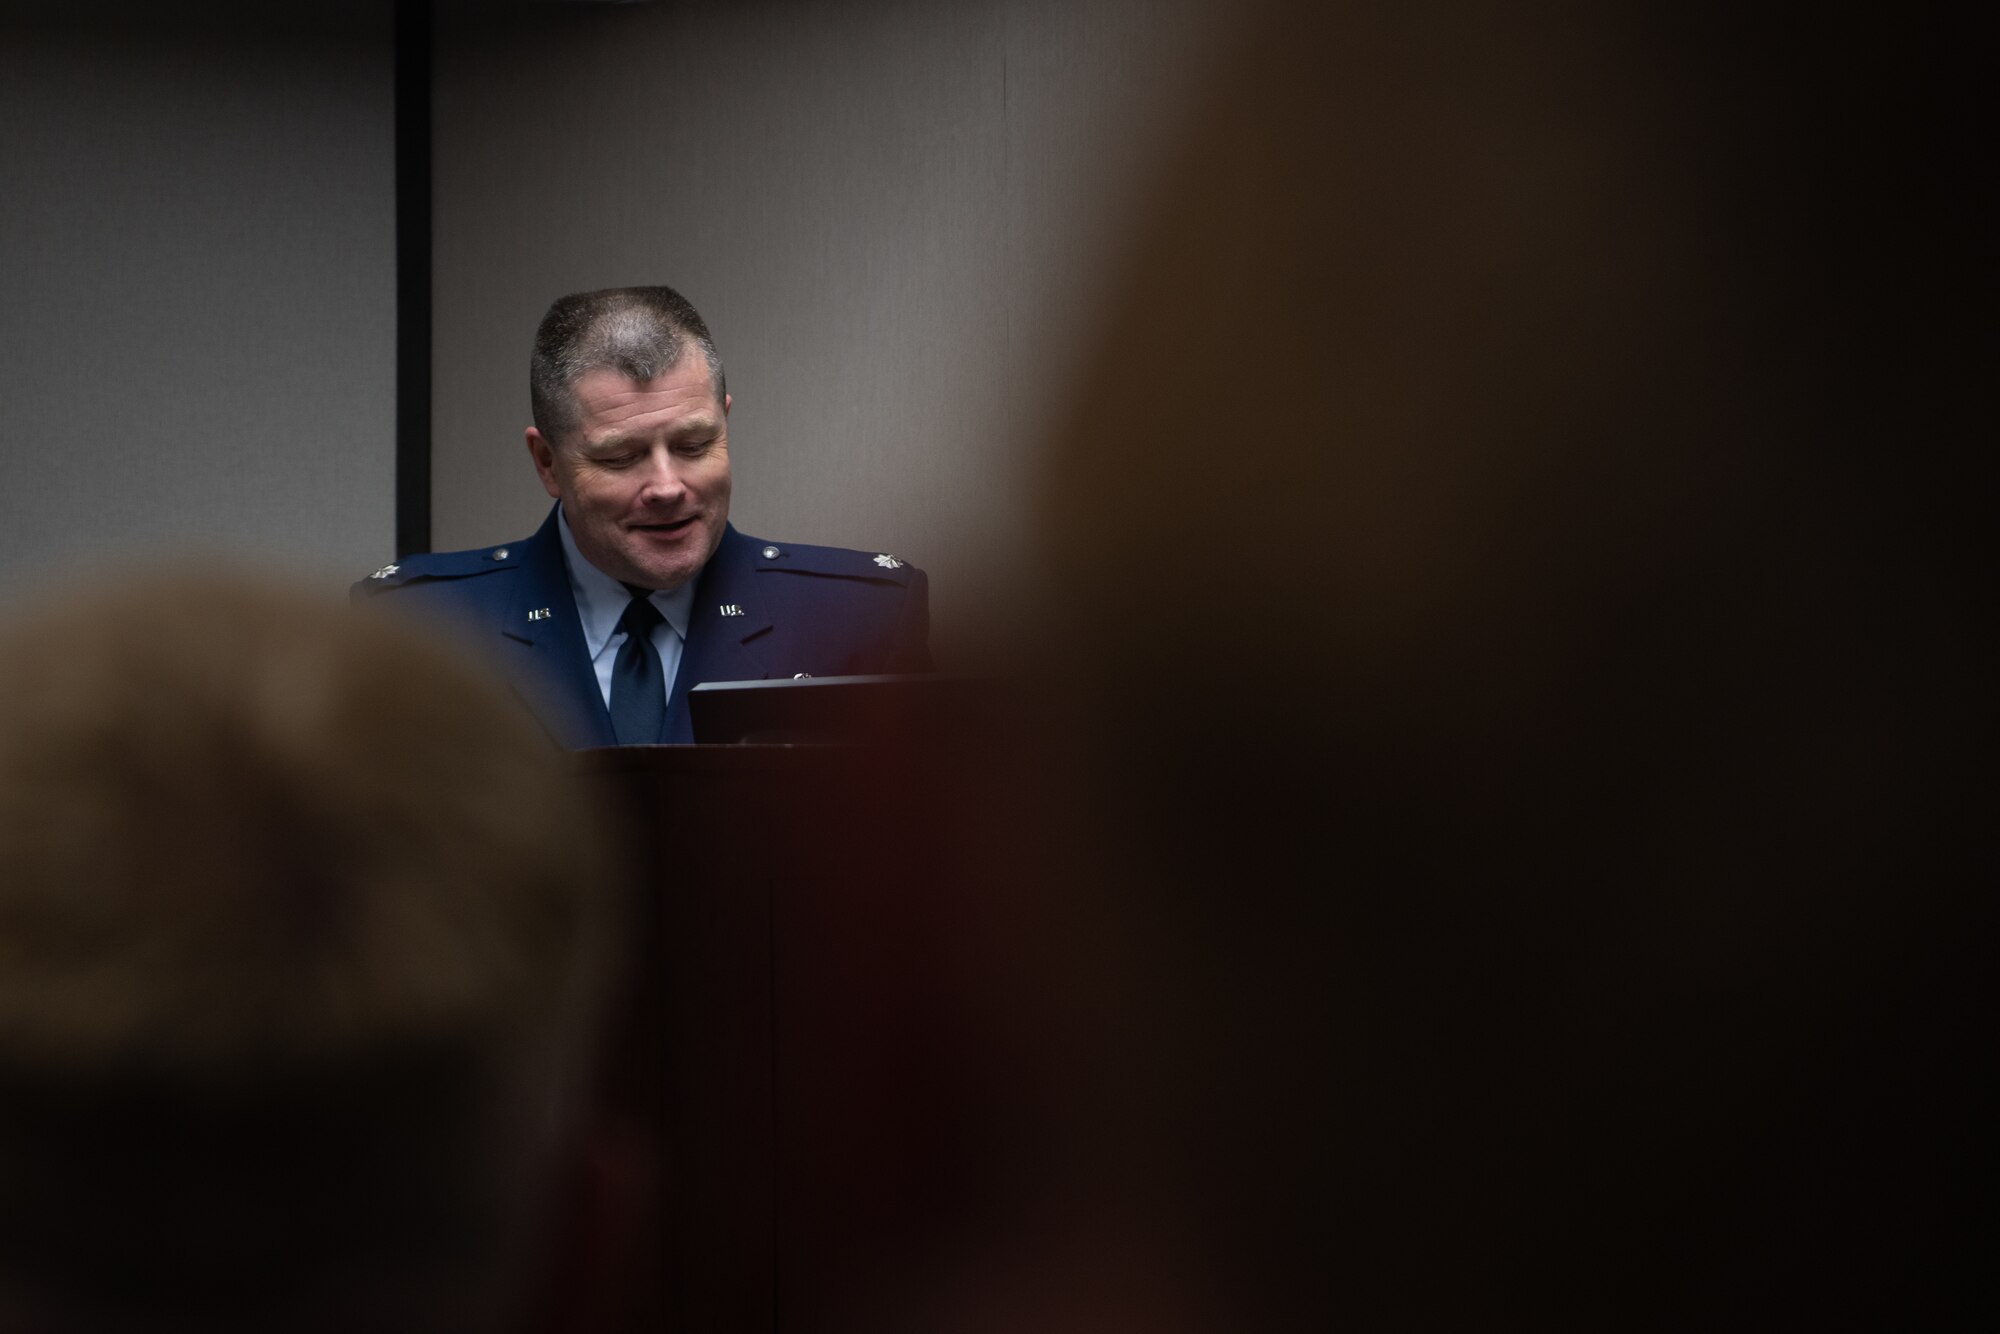 Lt. Col. Christopher Harris, 403rd Operations Support Squadron commander at Keesler Air Force Base, Miss., addresses his new squadron during a change of command ceremony June 6, 2021. Prior to serving as commander, Harris was the chief of Standardizations and Evaluations officer for the 53rd Weather Reconnaissance Squadron where he was over all evaluations for aircrew in the unit. (U.S. Air Force photo by Staff Sgt. Shelton Sherrill)